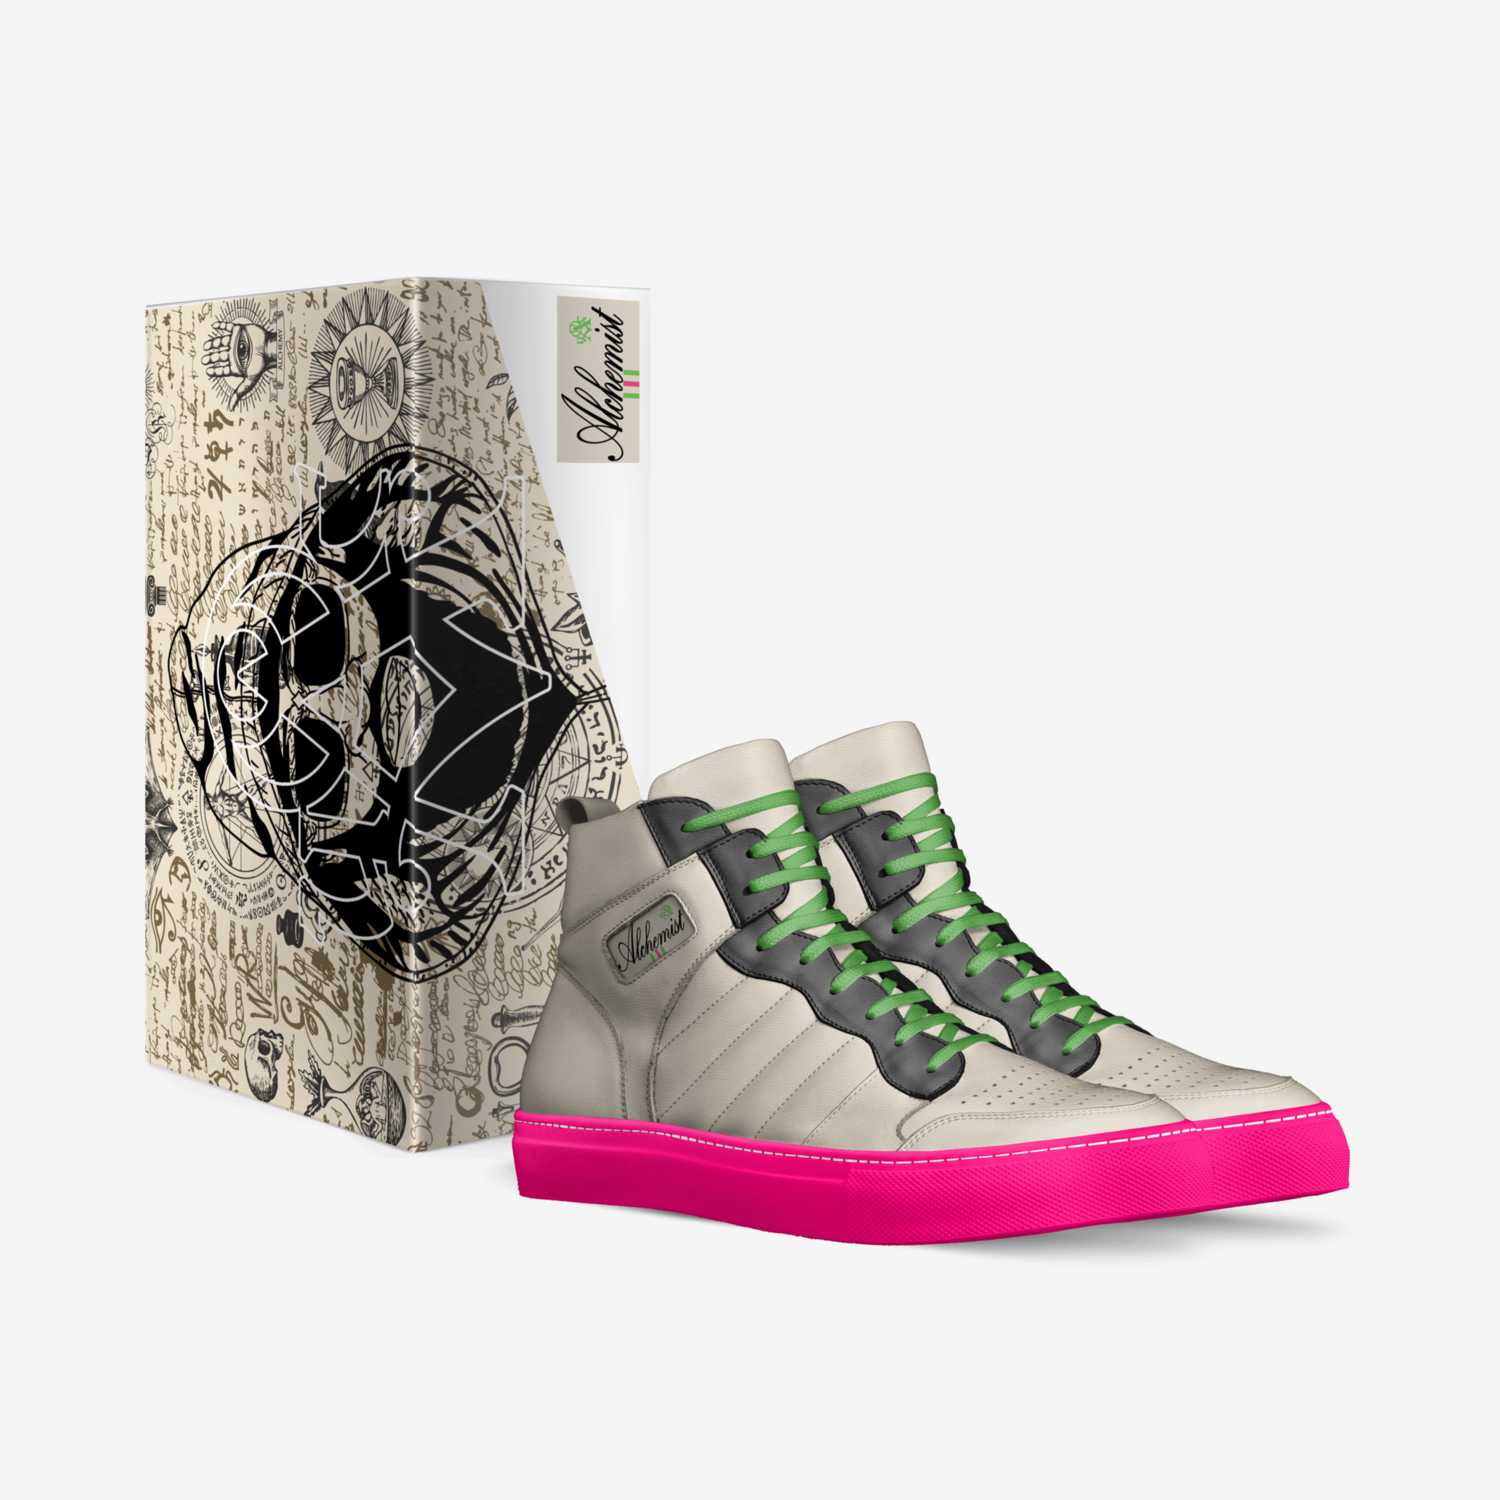 Alchemical custom made in Italy shoes by Urban Alchemist Clothing | Box view